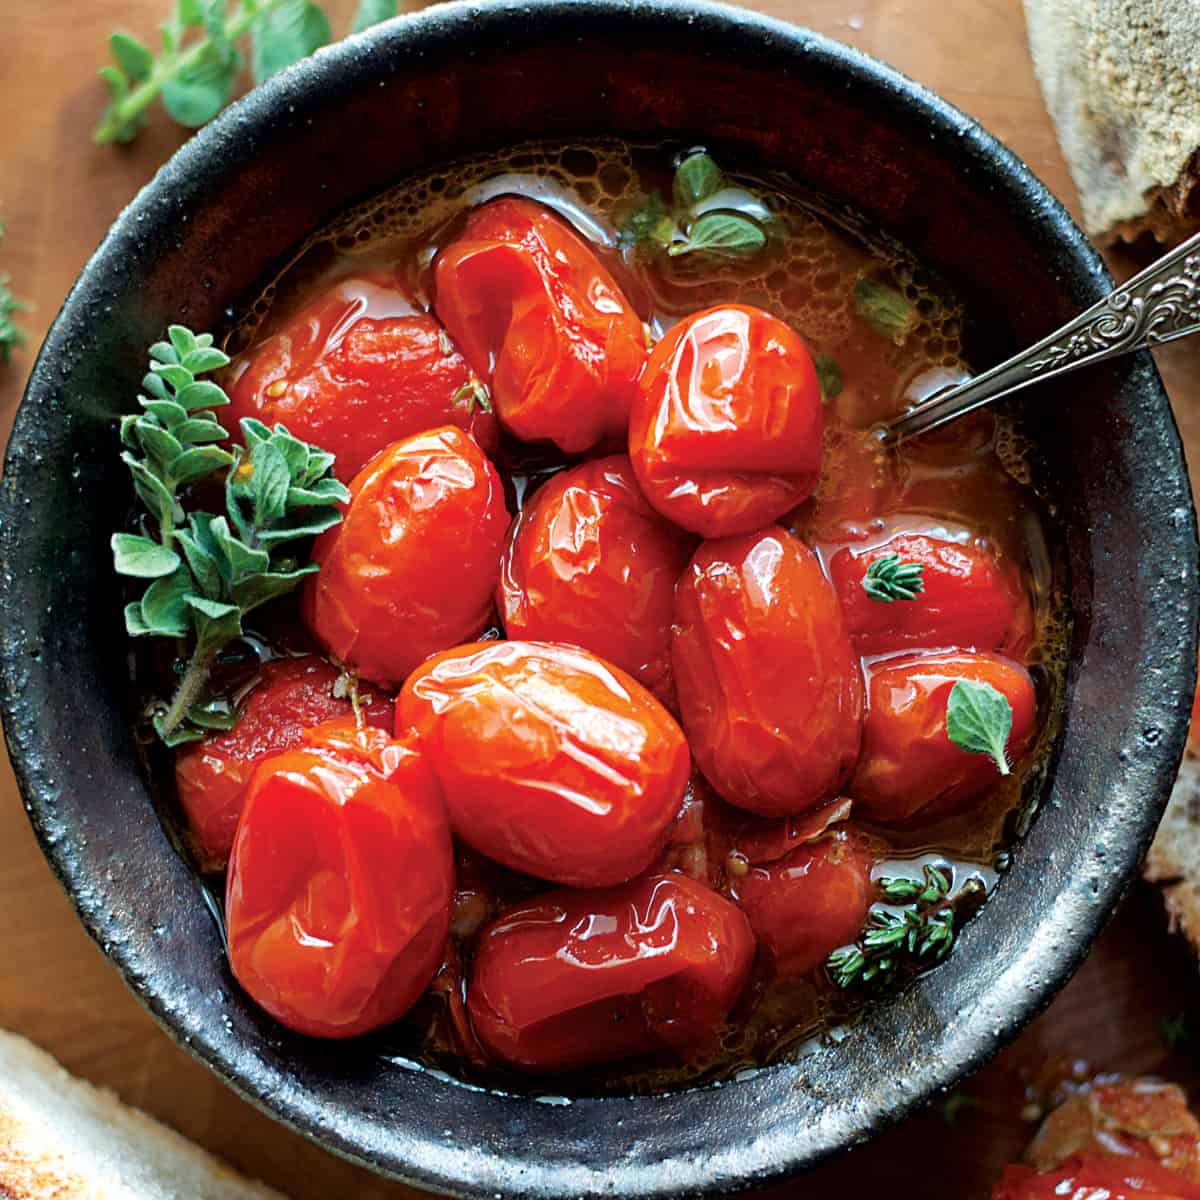 Amazing Tomato Confit With Herbs